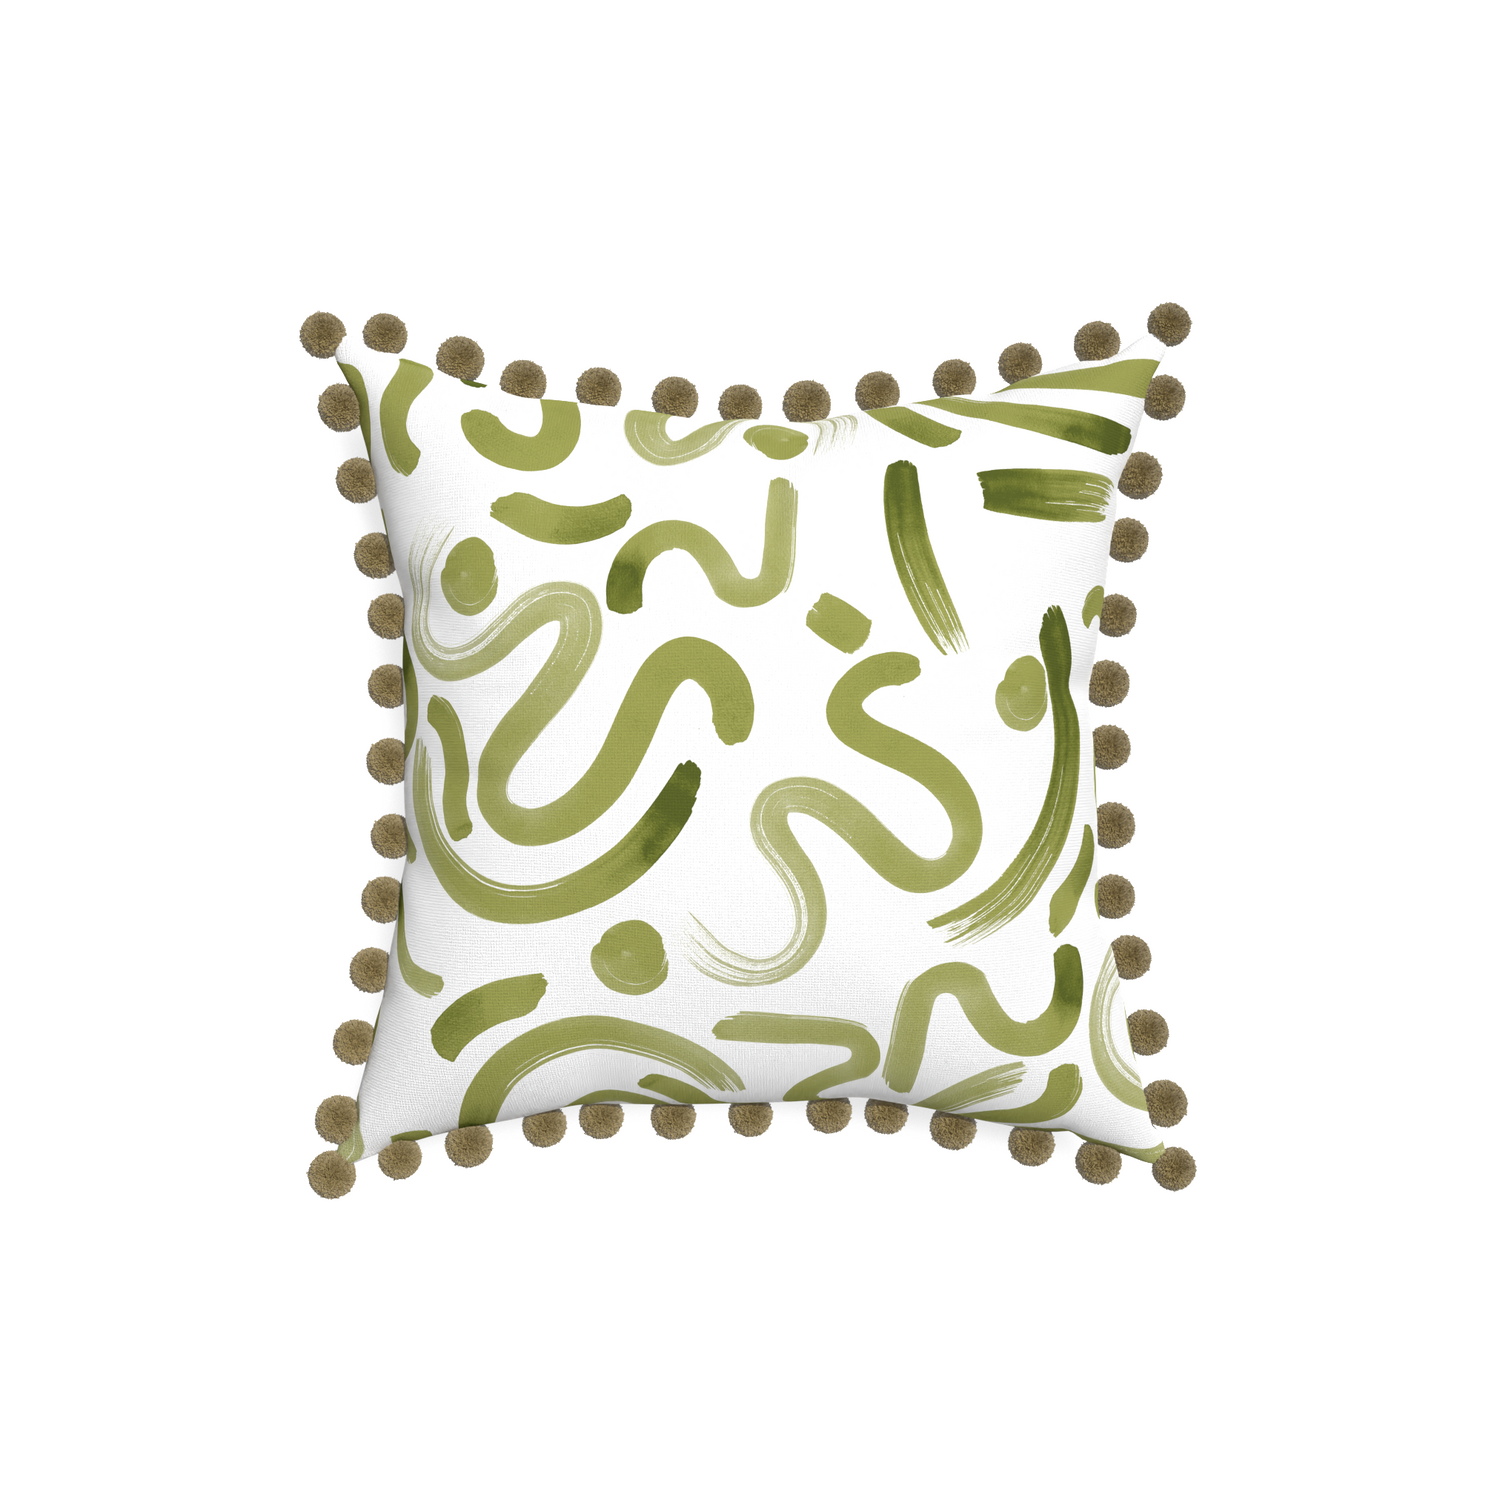 18-square hockney moss custom moss greenpillow with olive pom pom on white background